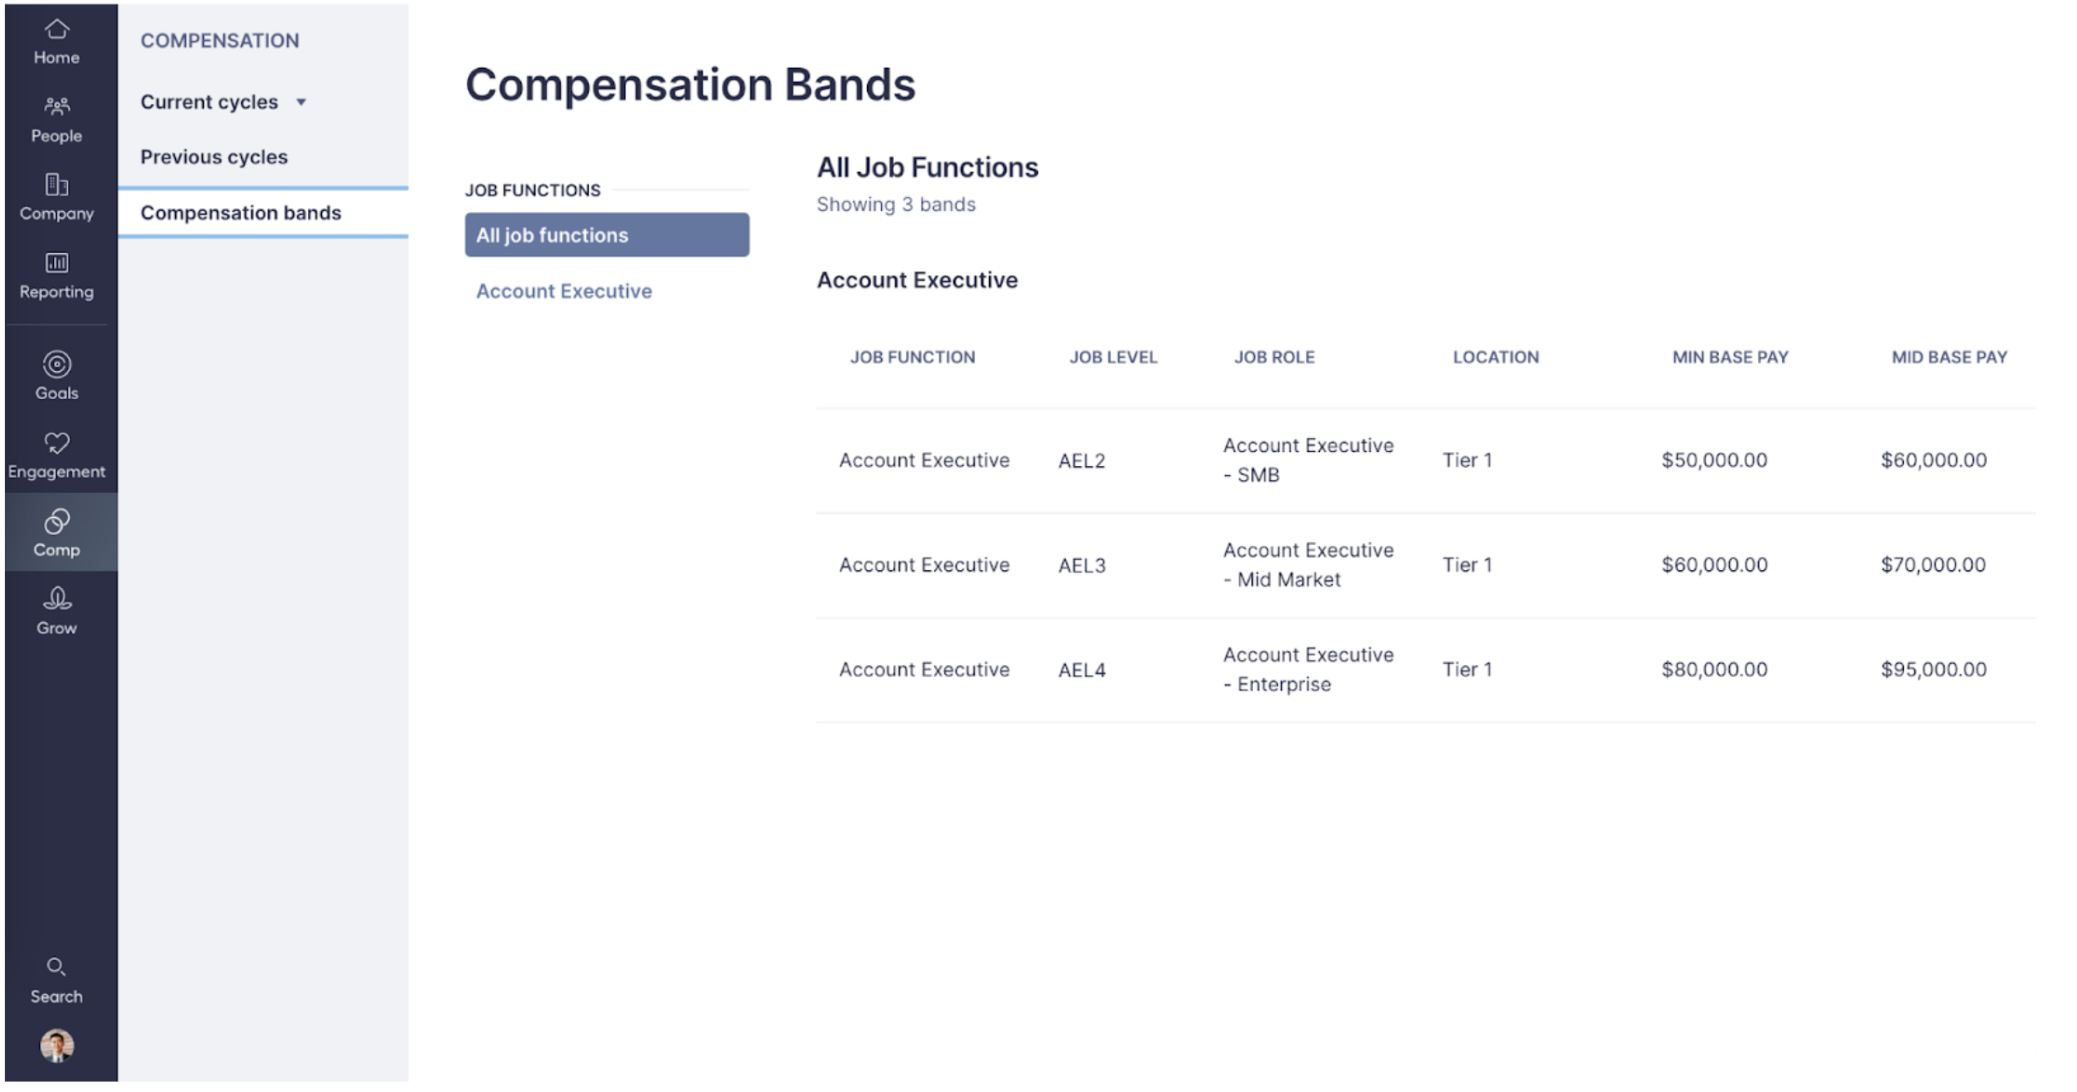 Image of Compensation Bands section within the Compensation Hub